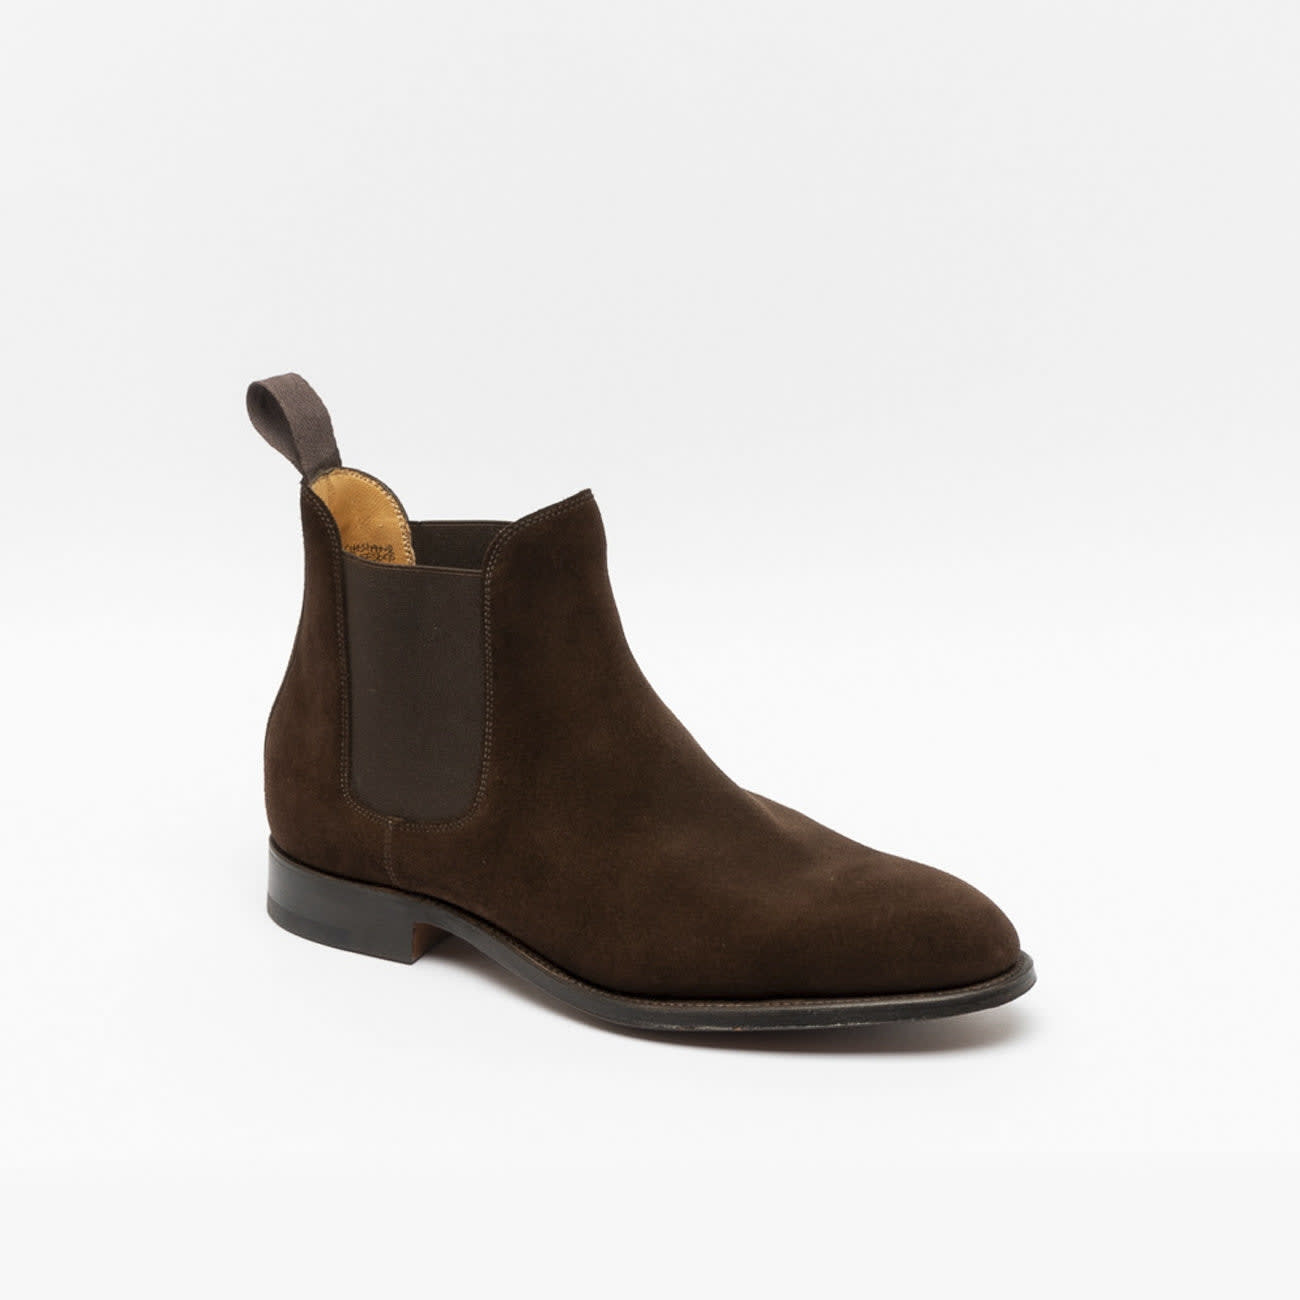 Chesland Brown Suede Ankle Boot